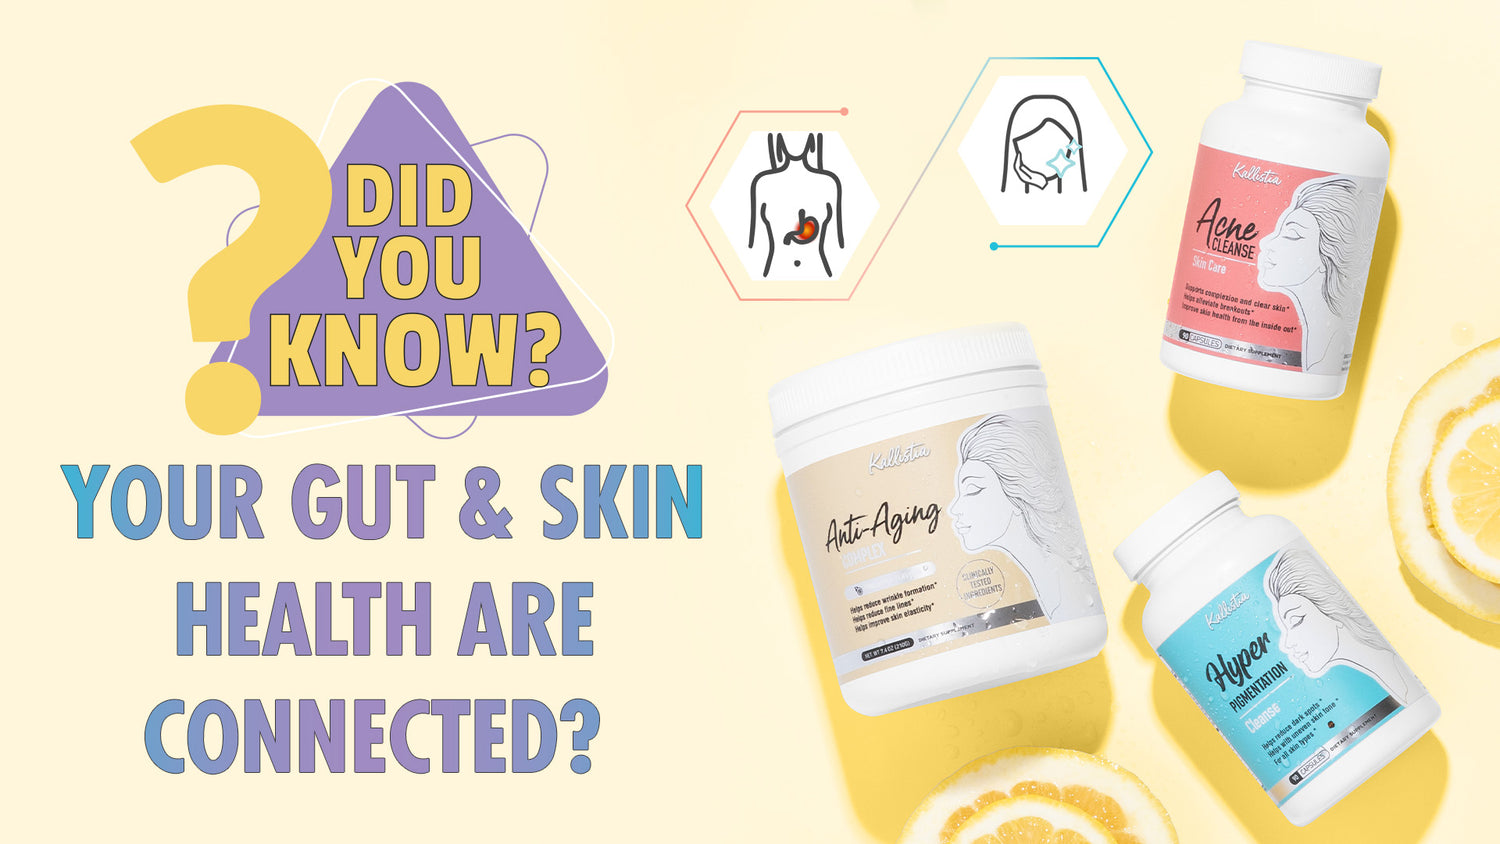 Did you know your gut & skin health are connected?